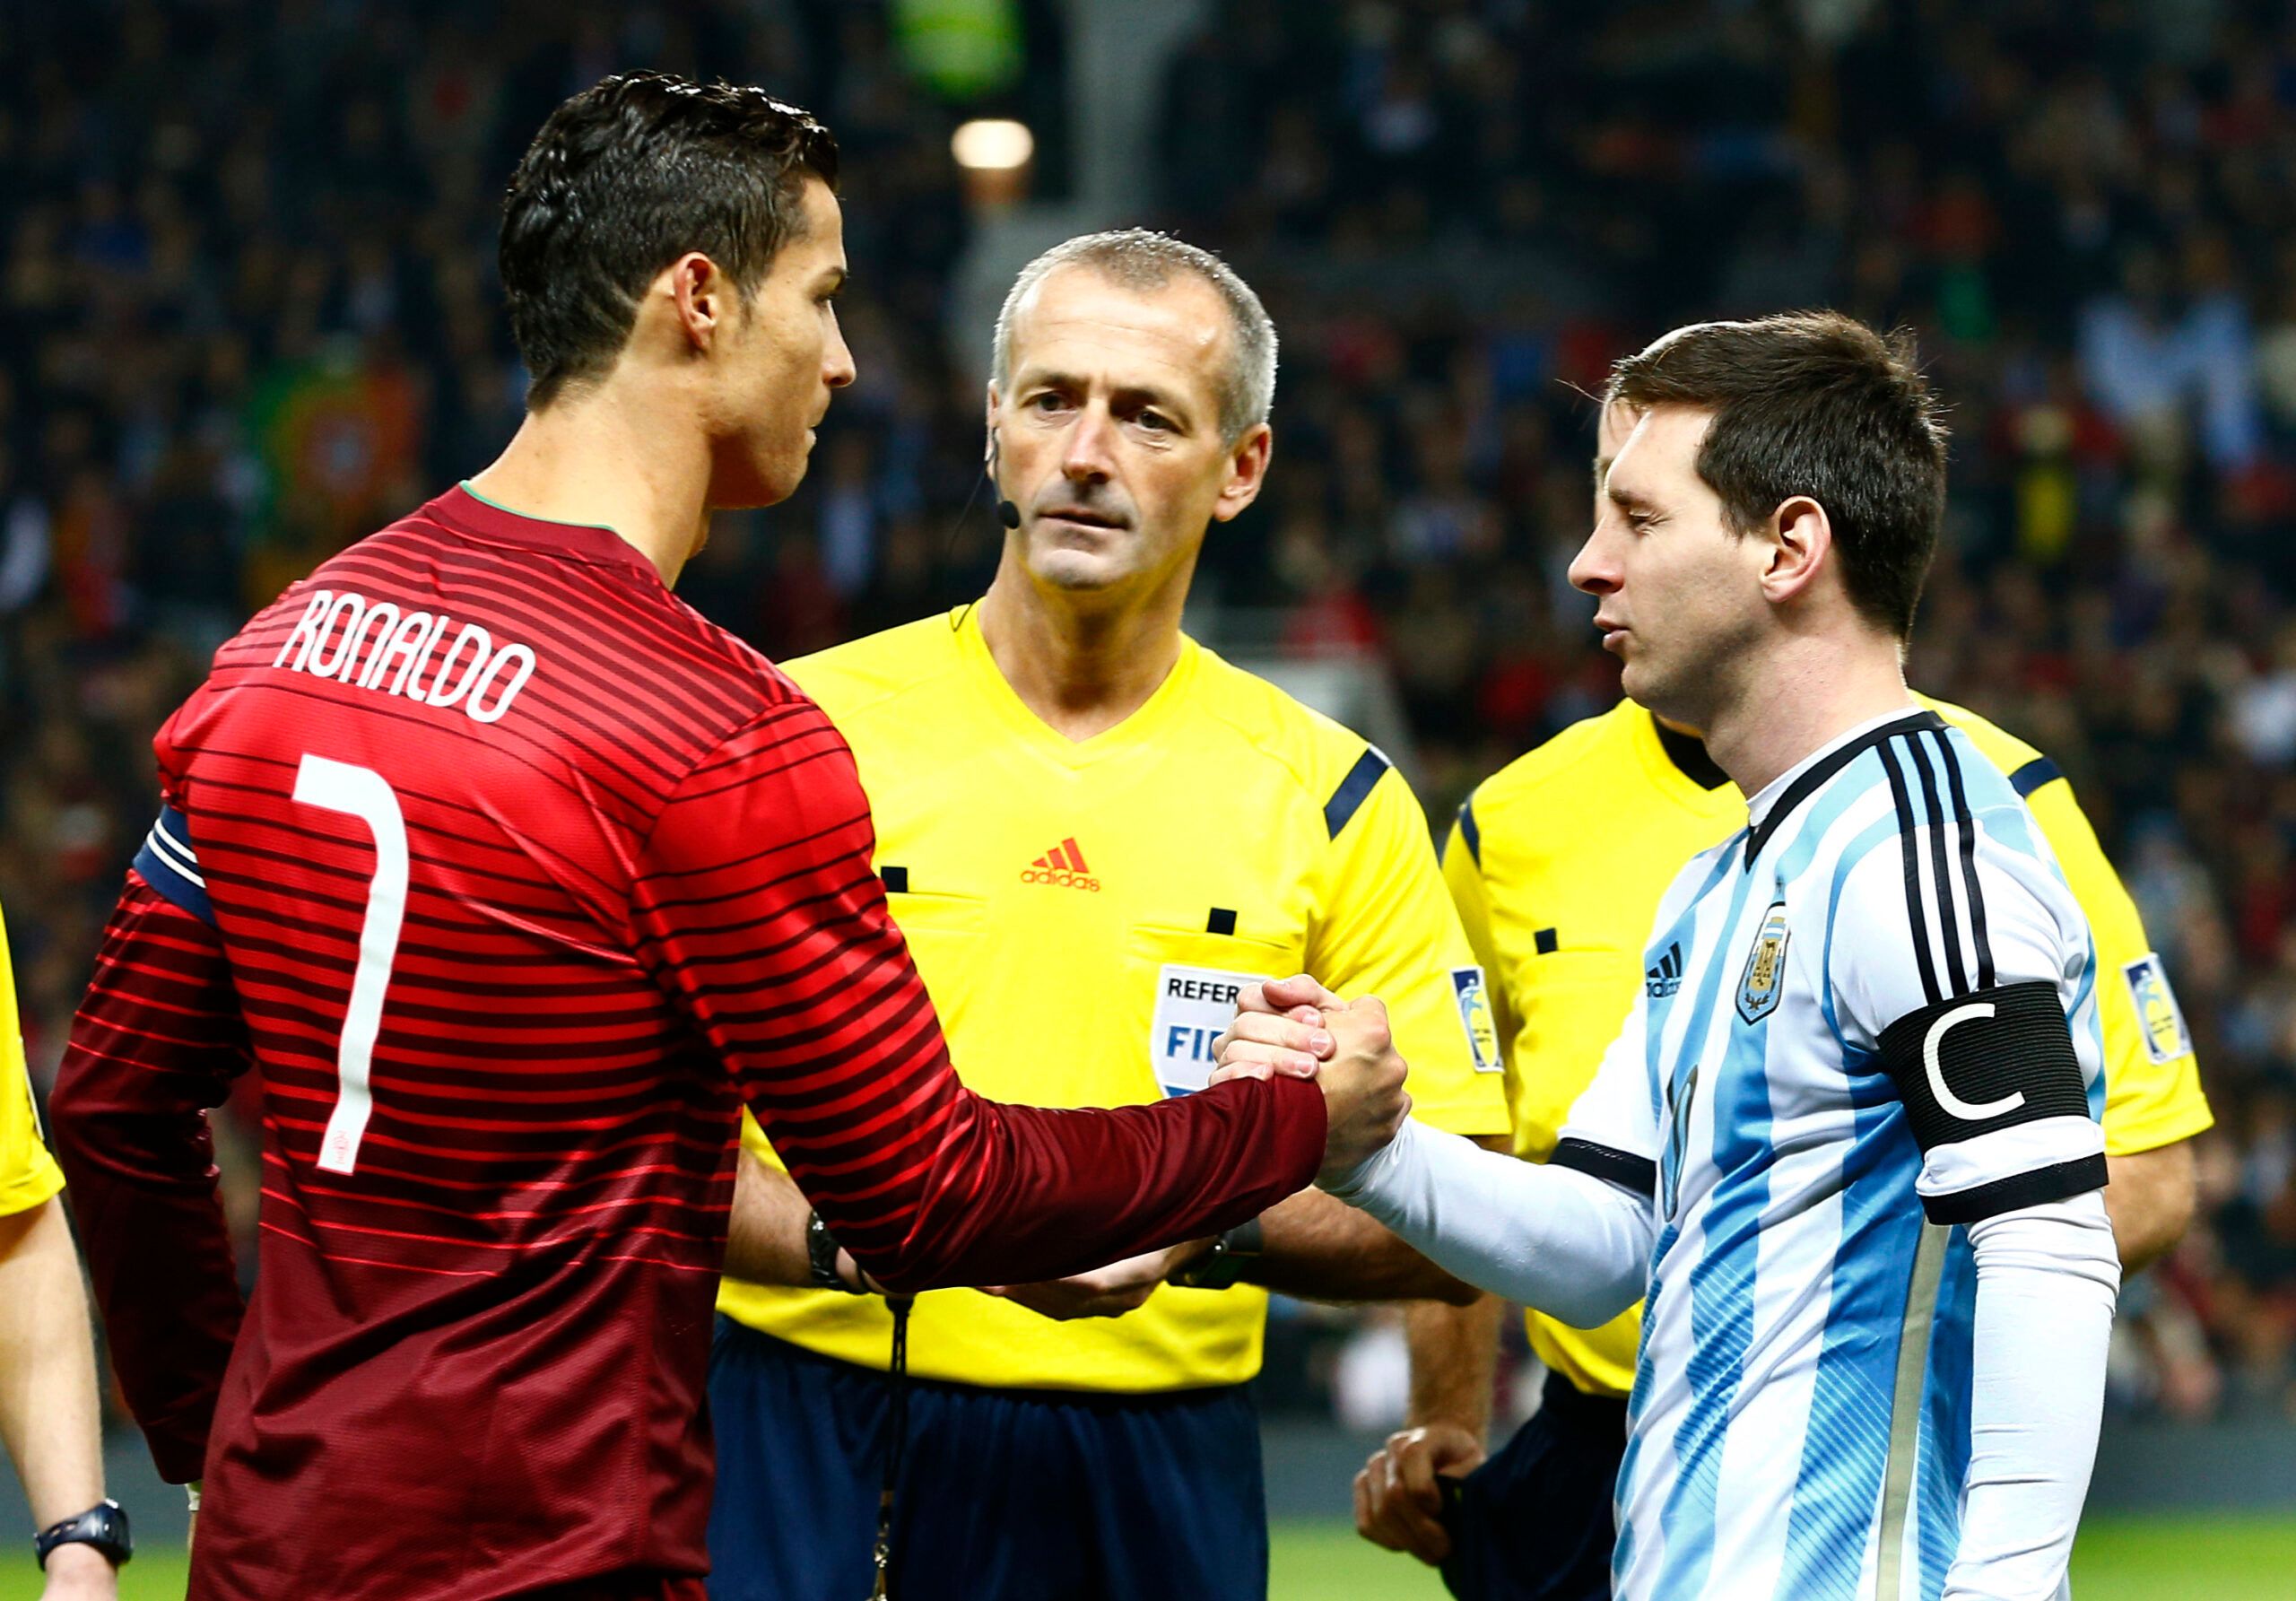 World Cup 2022: Lionel Messi vs Cristiano Ronaldo and our primal obsession  with rivalries